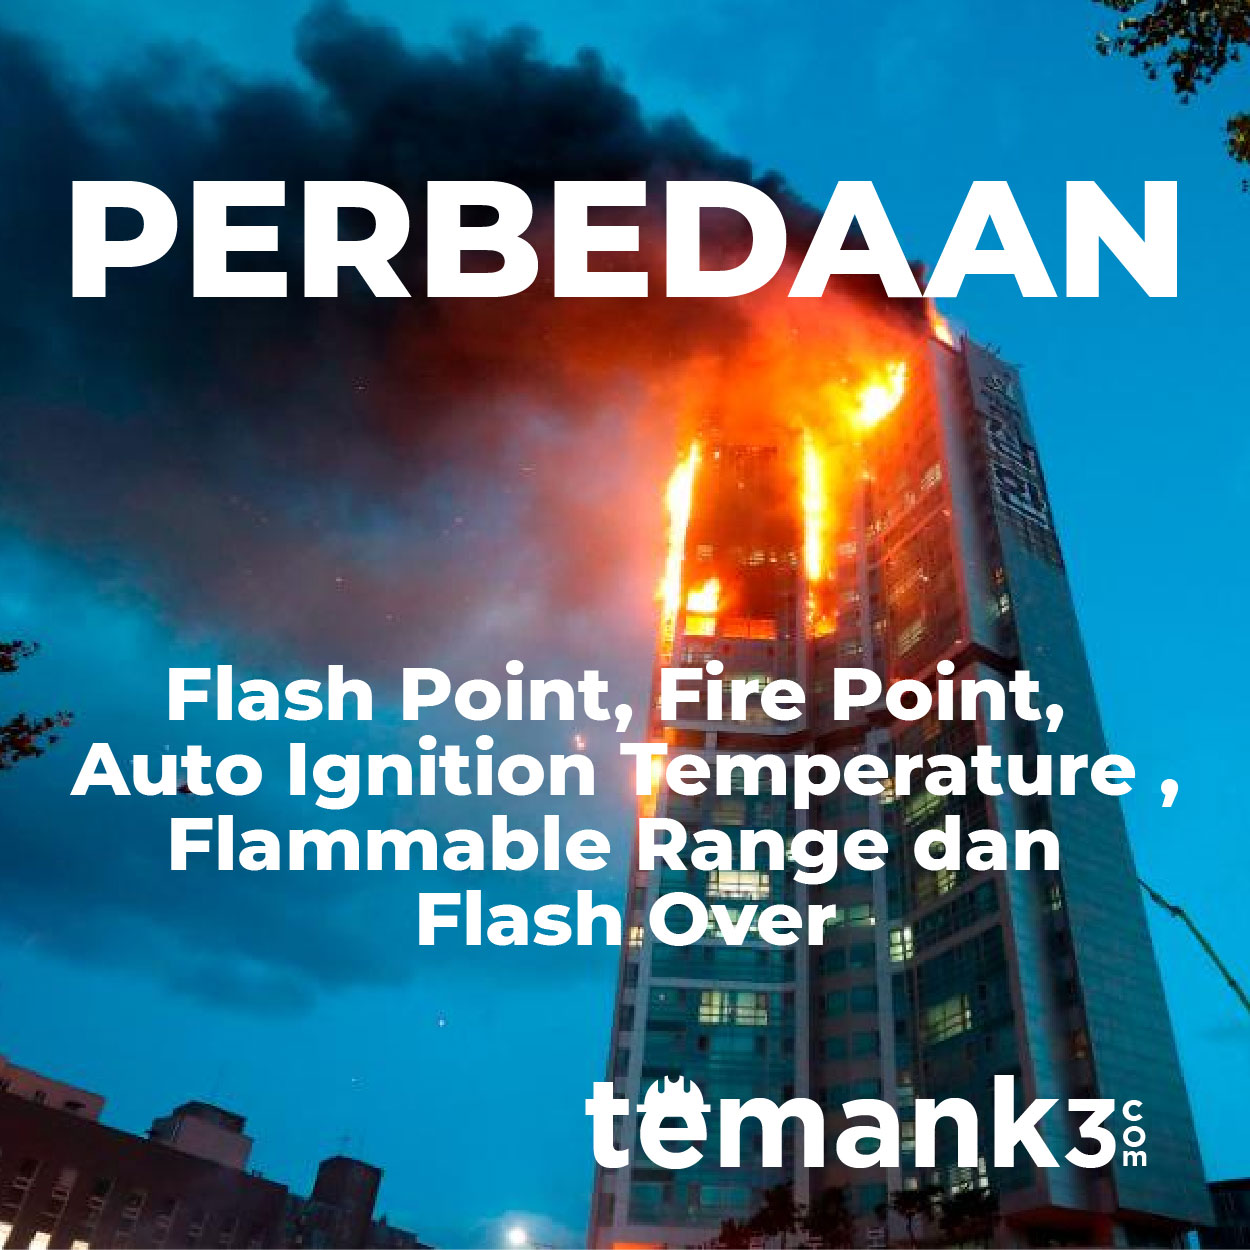 Perbedaan Flash Point, Fire Point, Auto Ignition Temperature ,Flammable Range dan Flash Over